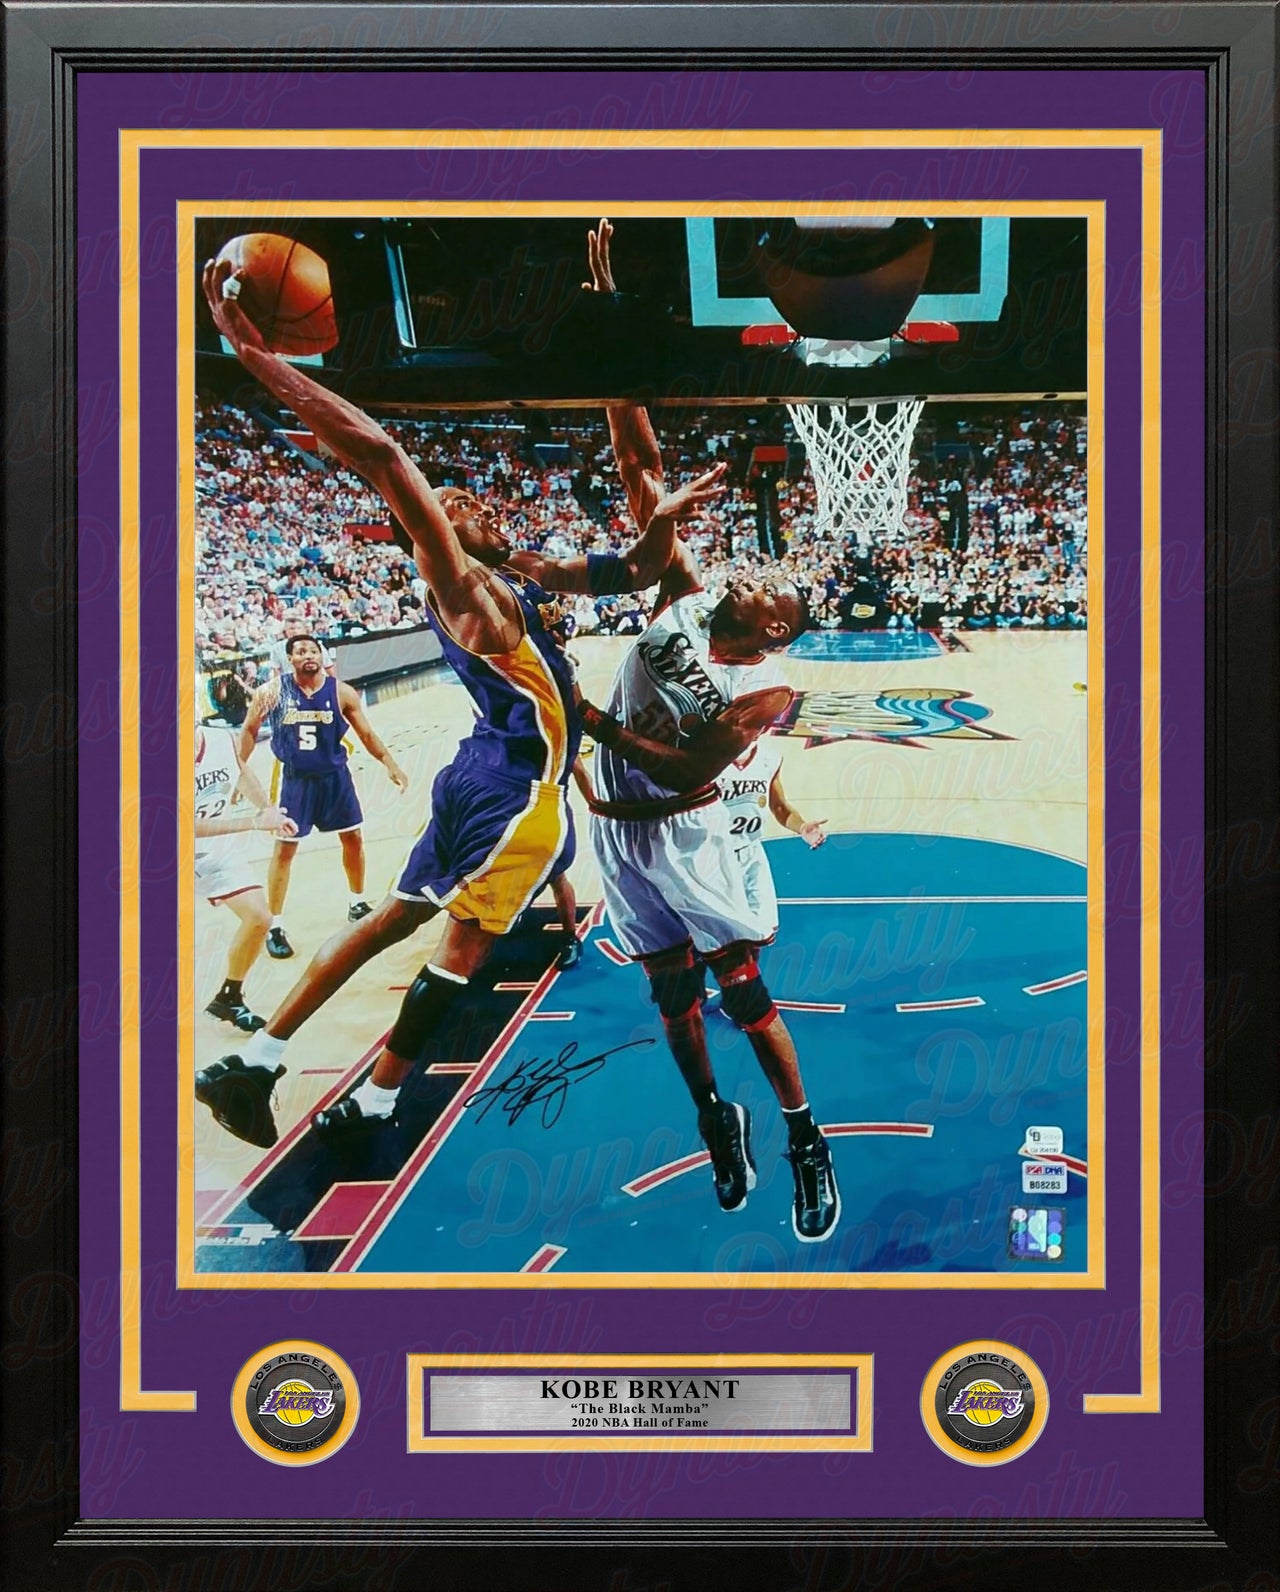 Los Angeles Lakers Kobe Bryant Hall of Fame 1996-97 #24 Authentic Shor –  Lakers Store